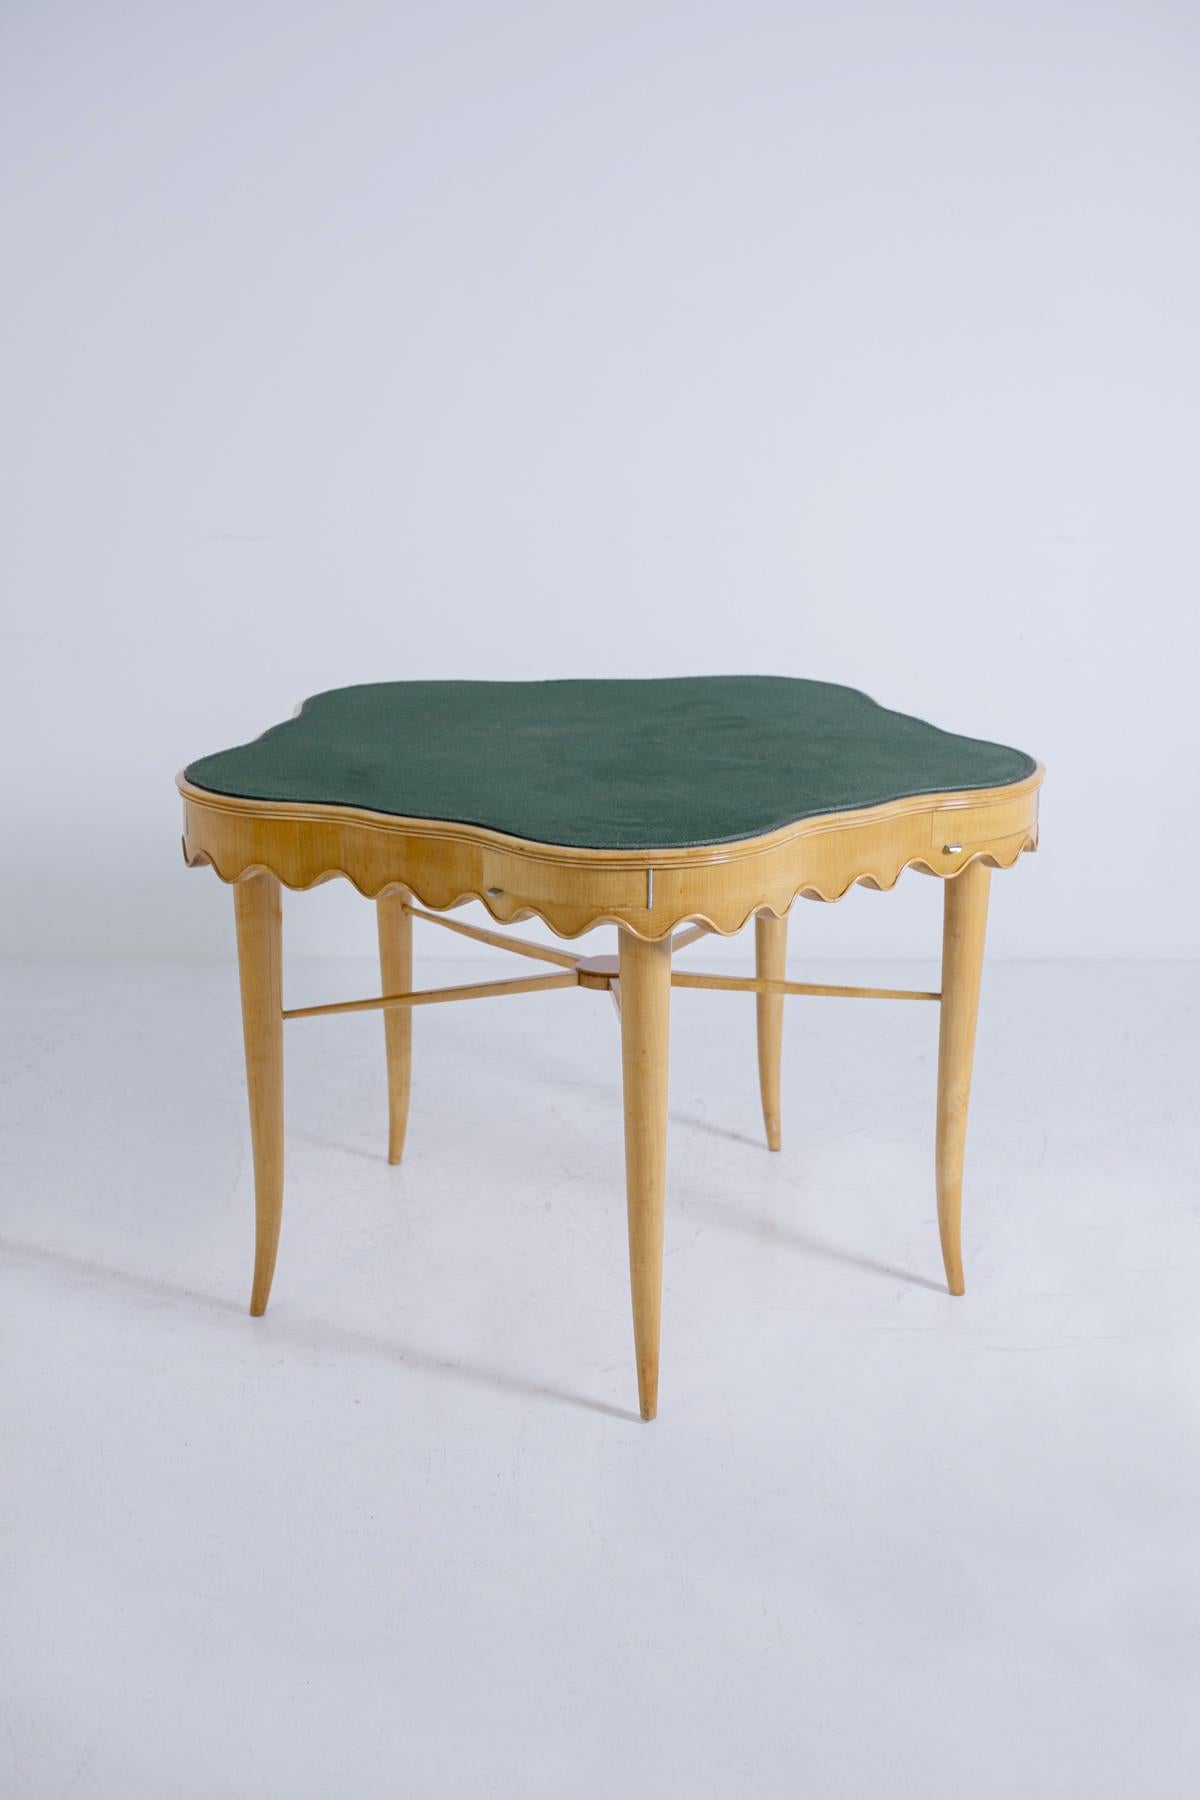 Elegant game table by Paolo Buffa of the 1950s. Excellent quality and restored.
The table is flower shaped with beautiful curves. Made of maple wood, the table has under the top a wave skirt that runs around the entire perimeter of the table. Above